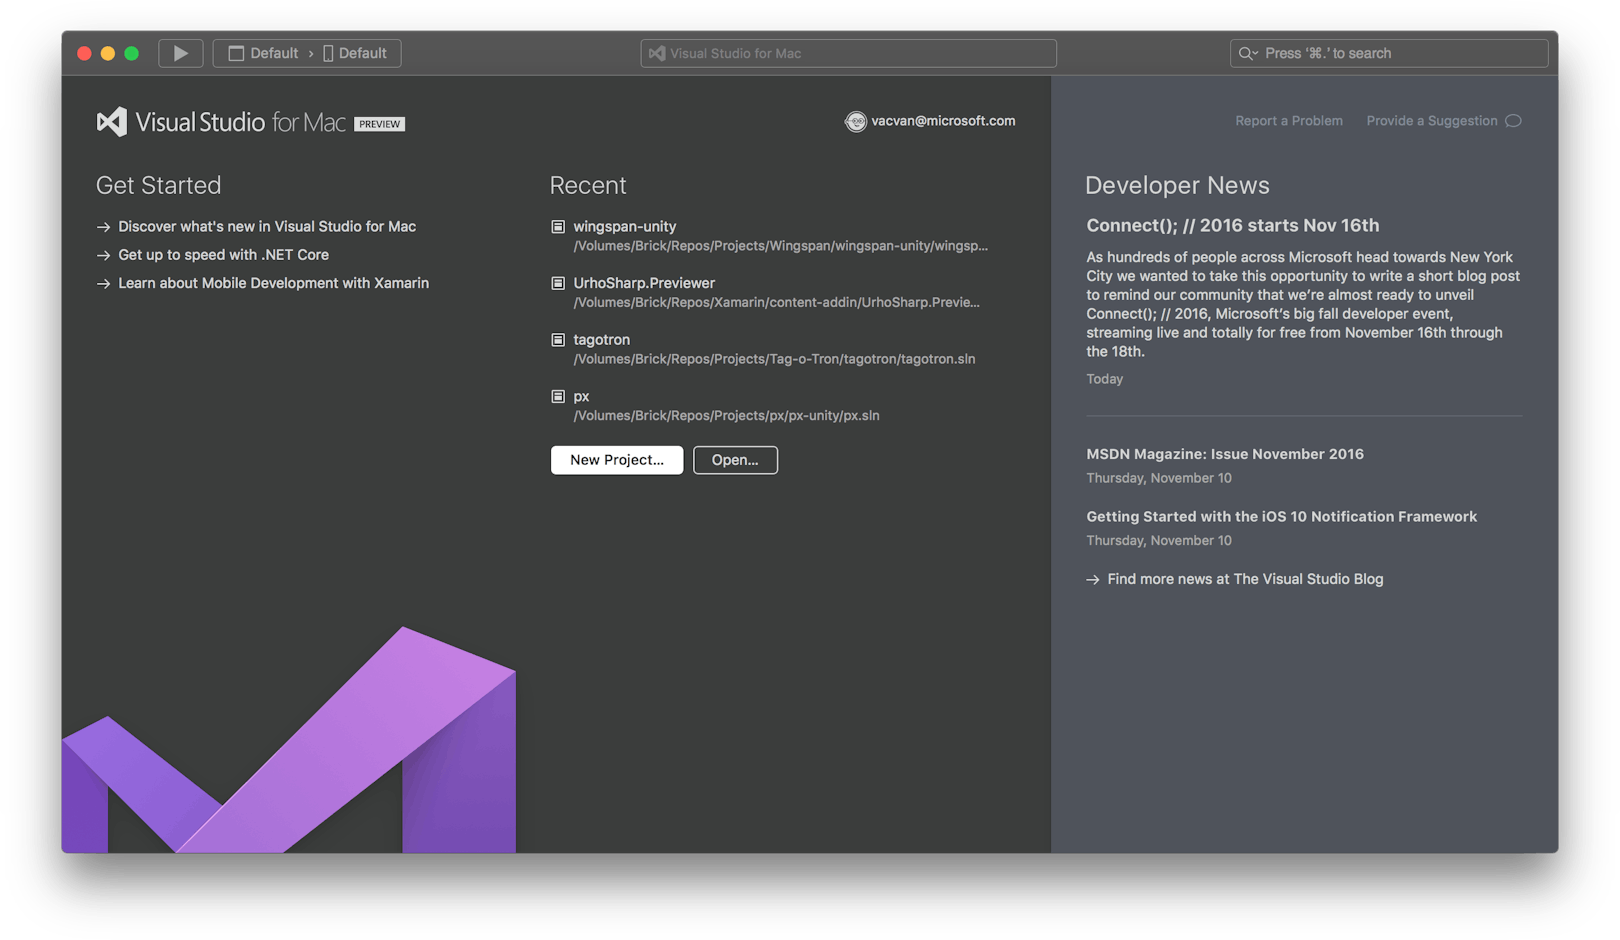 Final design of the Welcome Screen in Visual Studio for Mac in the dark UI theme